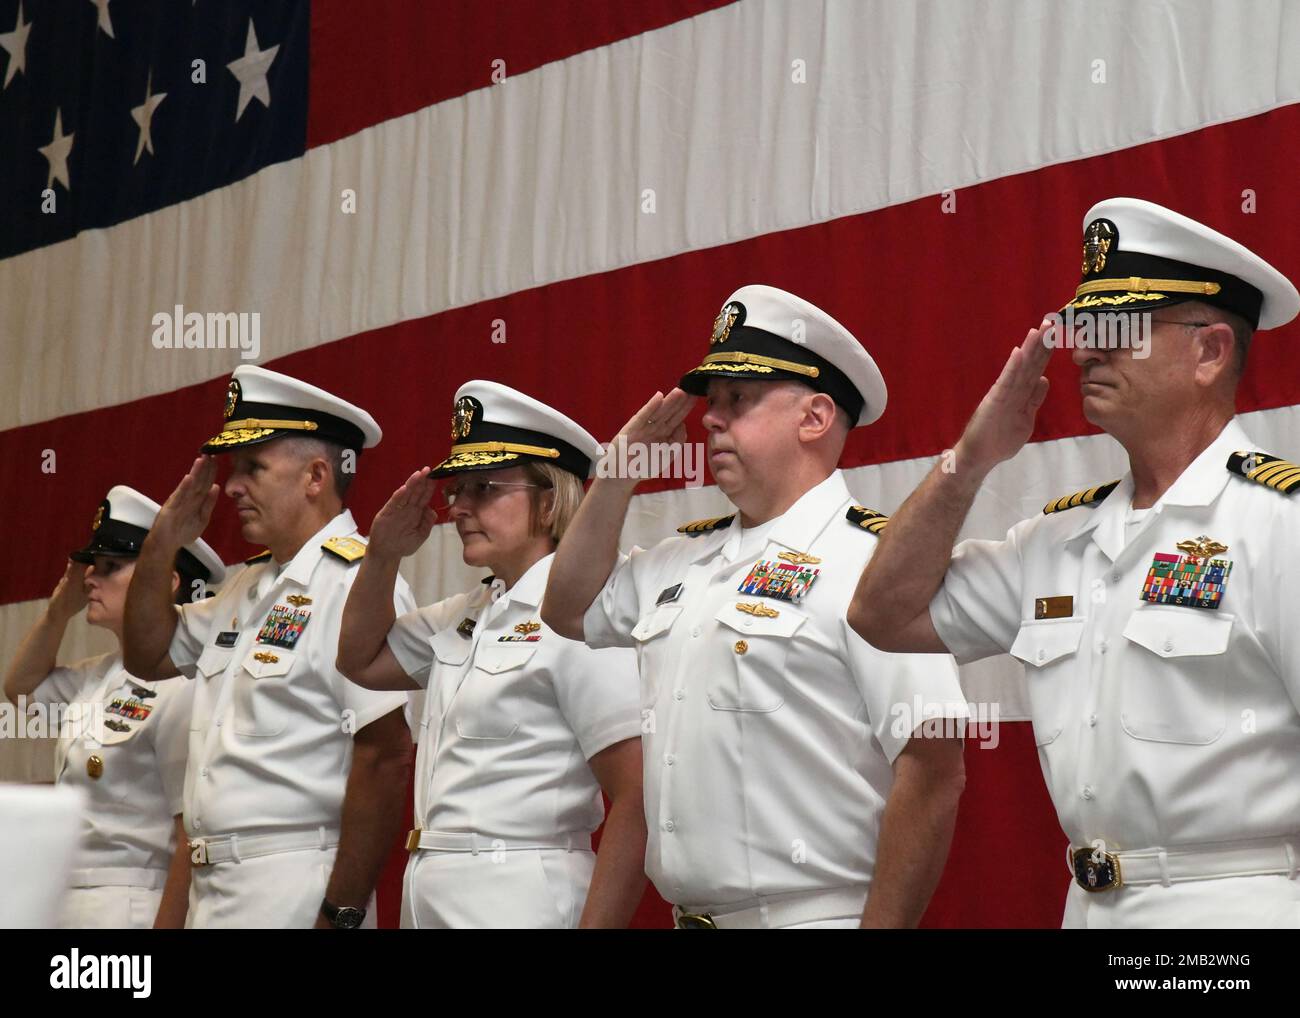 Naval Information Warfighting Development Command (NIWDC) held a change of command ceremony on 10 June.  Rear Adm. Michael J. Vernazza (second from left) was relieved as Commander NIWDC by CAPT Bryan E. Braswell (second from right).  Vice Adm. Kelly A. Aeschbach, Commander, Naval Information Forces (center), was the presiding officer.  Also pictured are CTTCM Kristalina M. Greene (left) and CAPT David B. Thames, Chaplain (right). Stock Photo